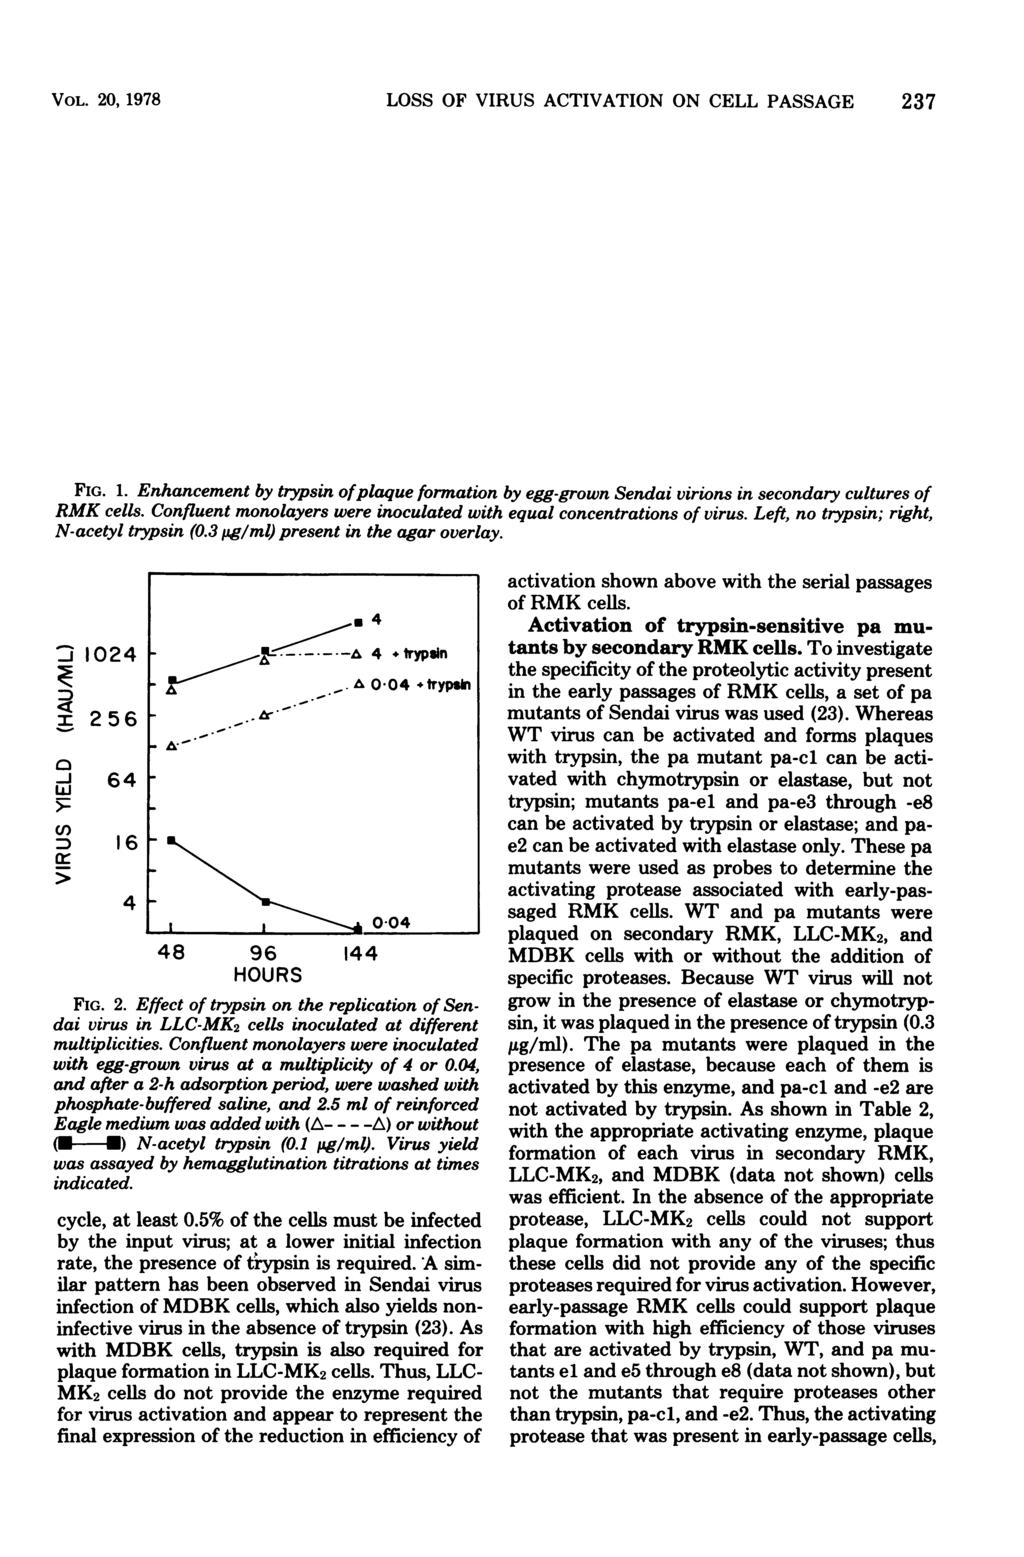 VOL. 20, 1978 LOSS OF VIRUS ACTIVATION ON CELL PASSAGE 237 FIG. 1. Enhancement by trypsin ofplaque formation by egg-grown Sendai virions in secondary cultures of RMK cells.